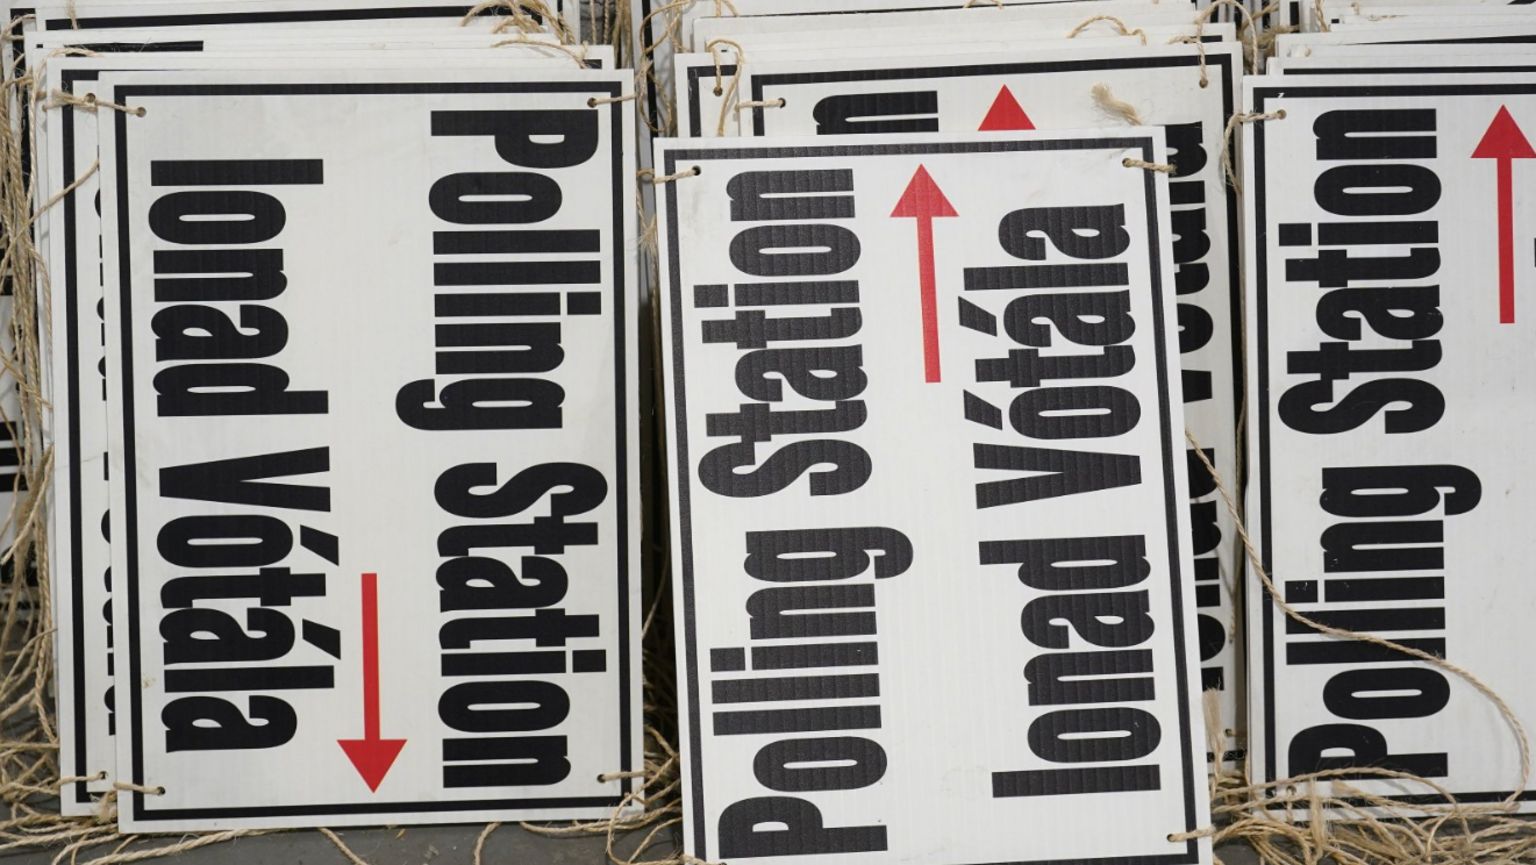 Polling station signs